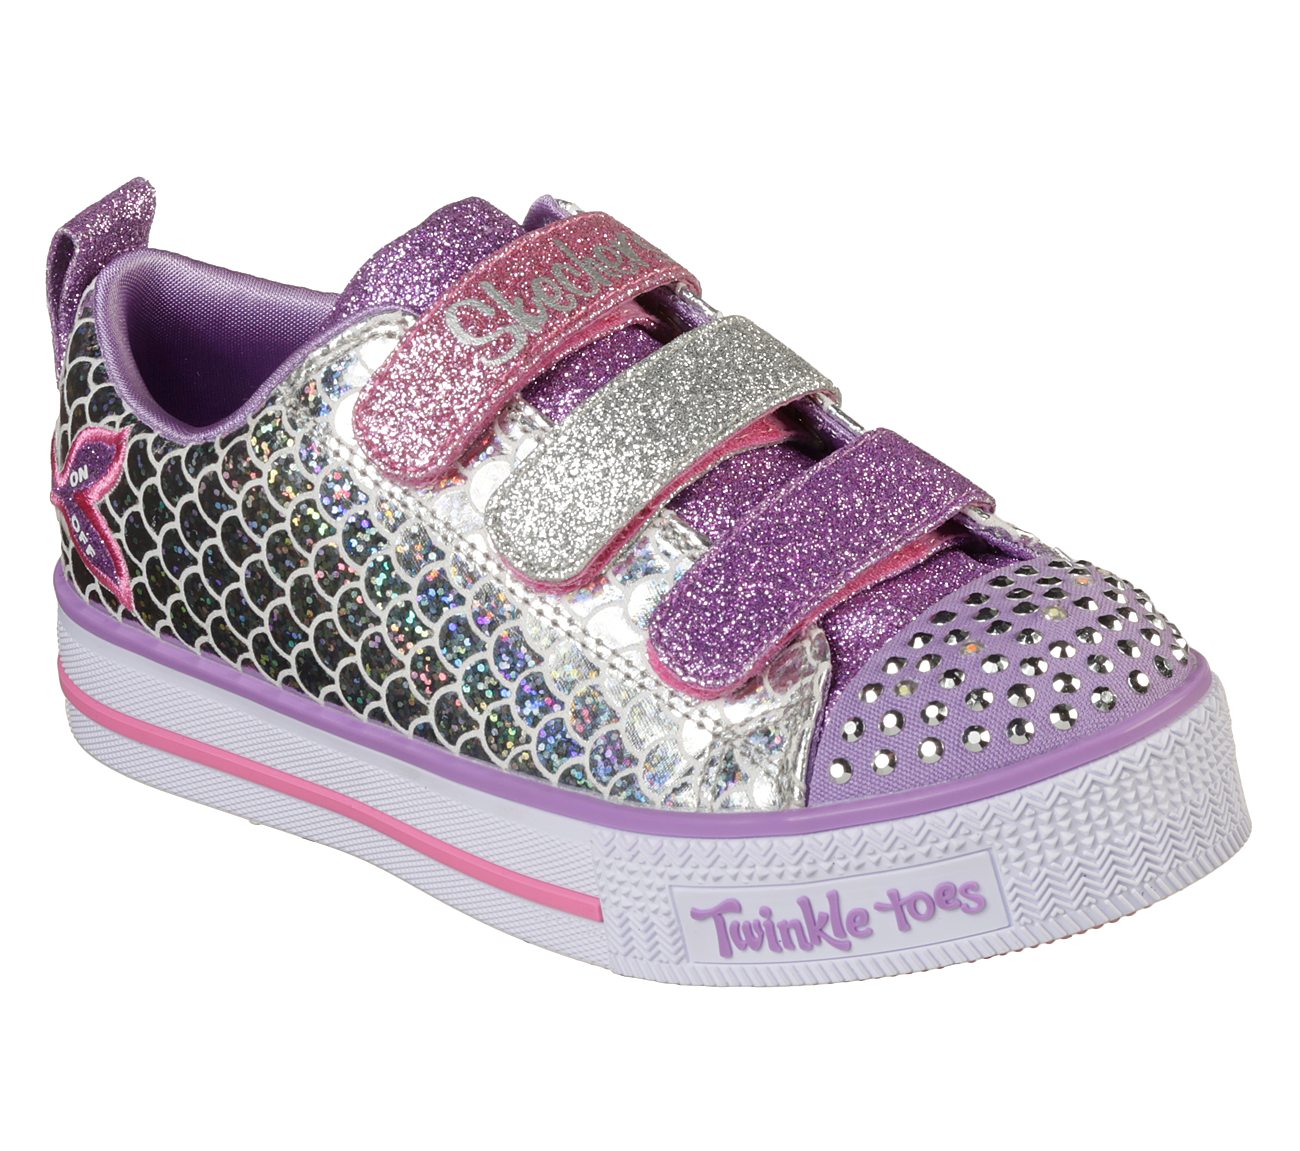 twinkle toes size 3